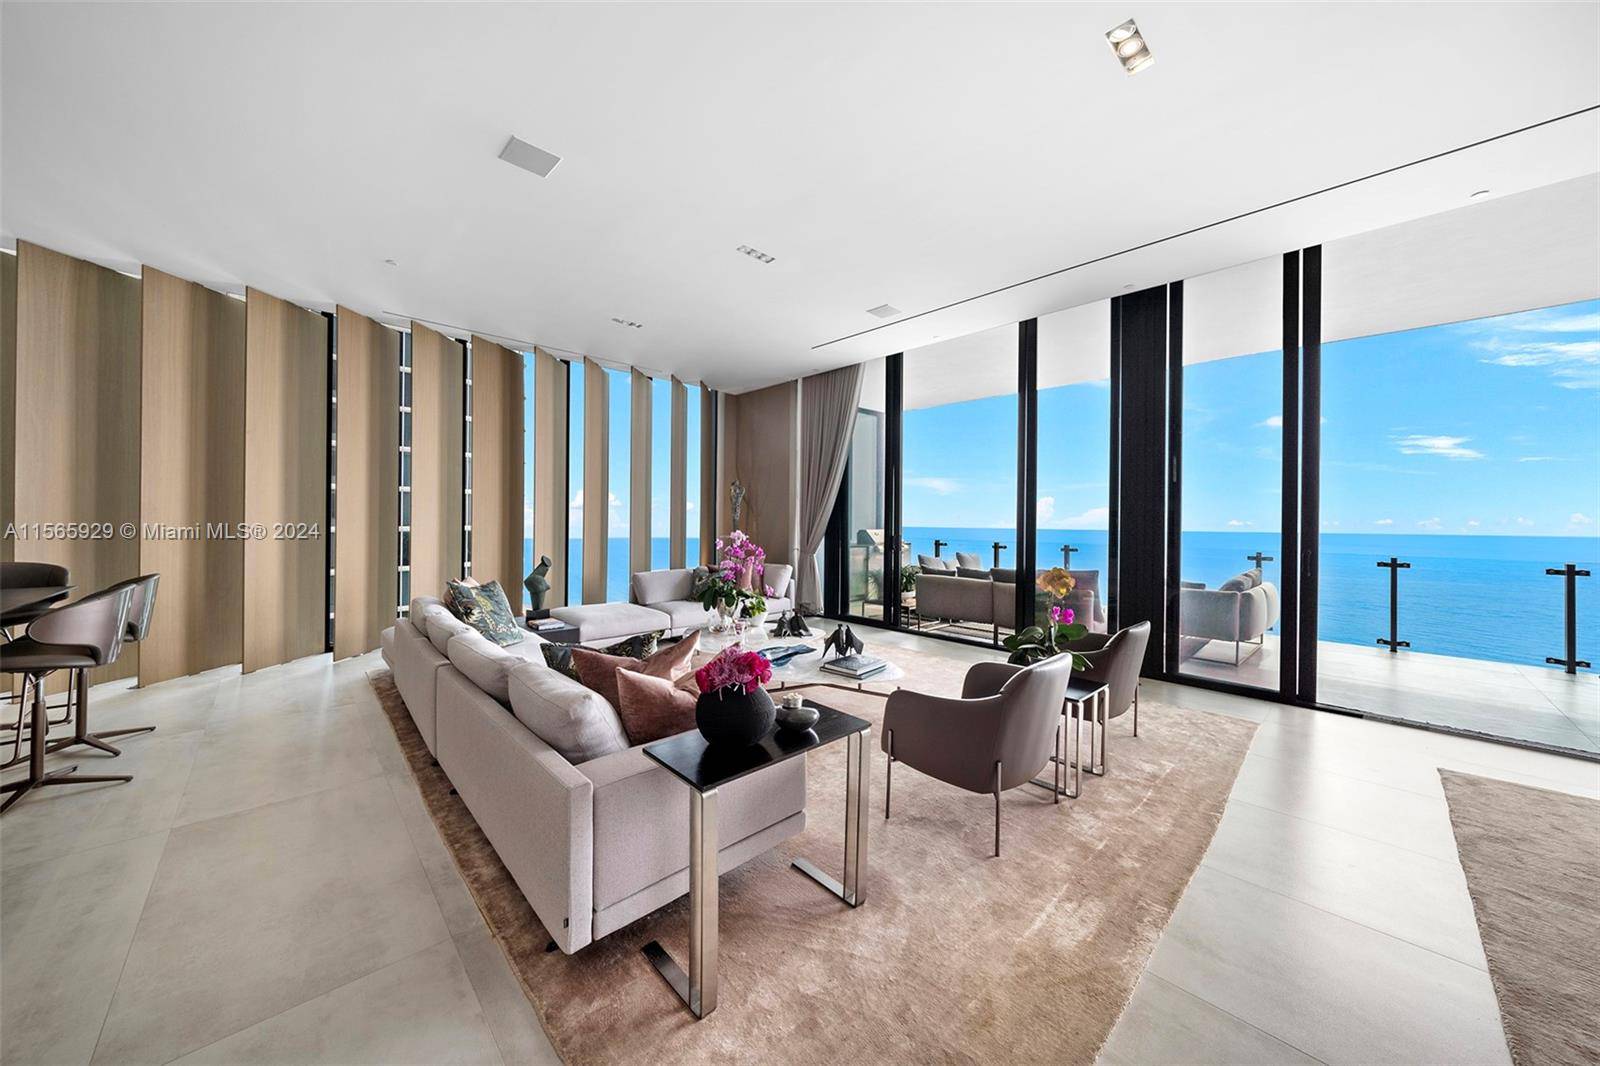 Muse Residences 2601 this spacious full floor residence boasts 4 bed, 5.